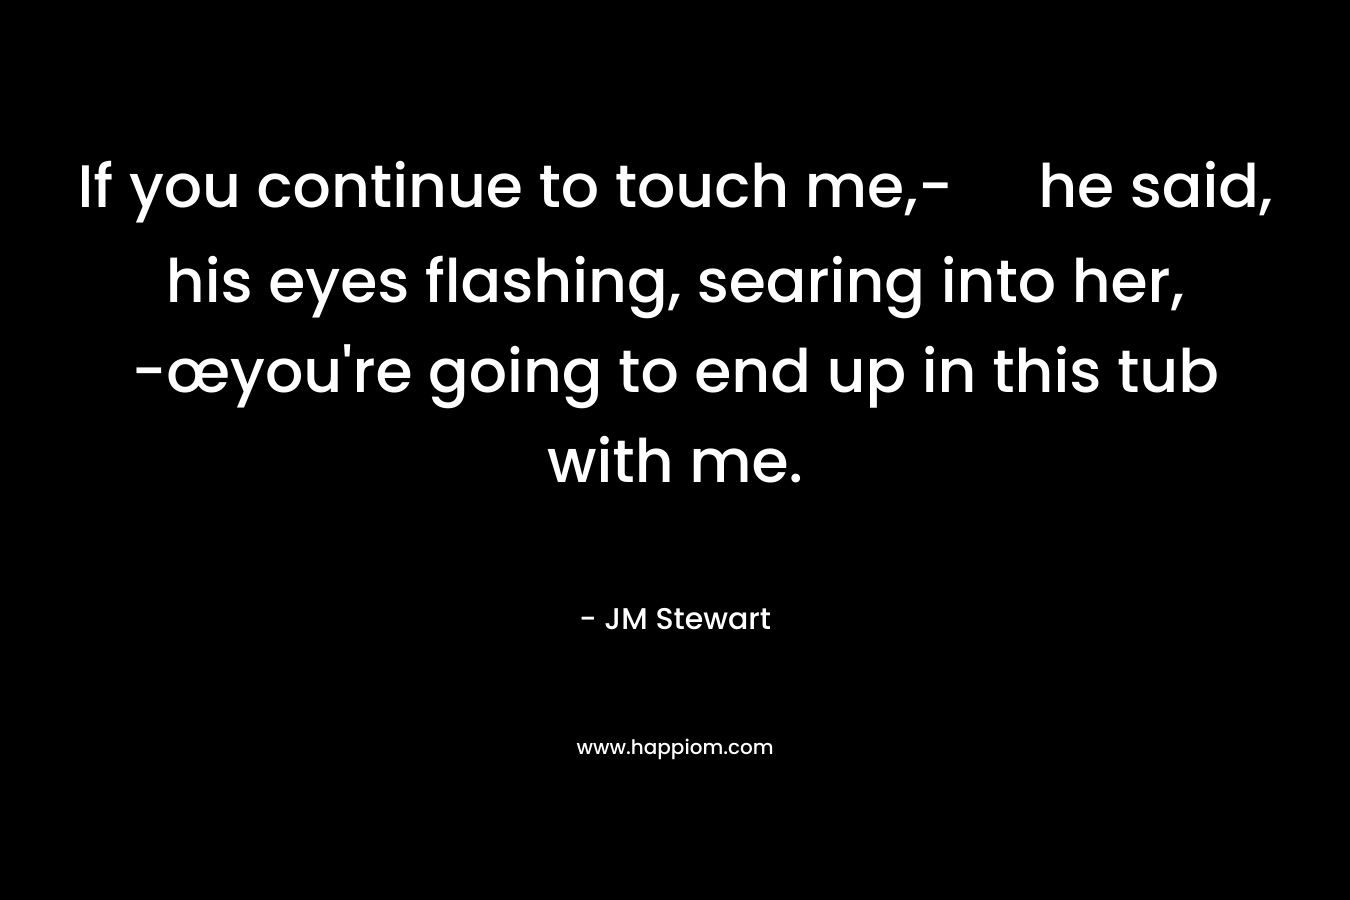 If you continue to touch me,- he said, his eyes flashing, searing into her, -œyou’re going to end up in this tub with me. – JM Stewart